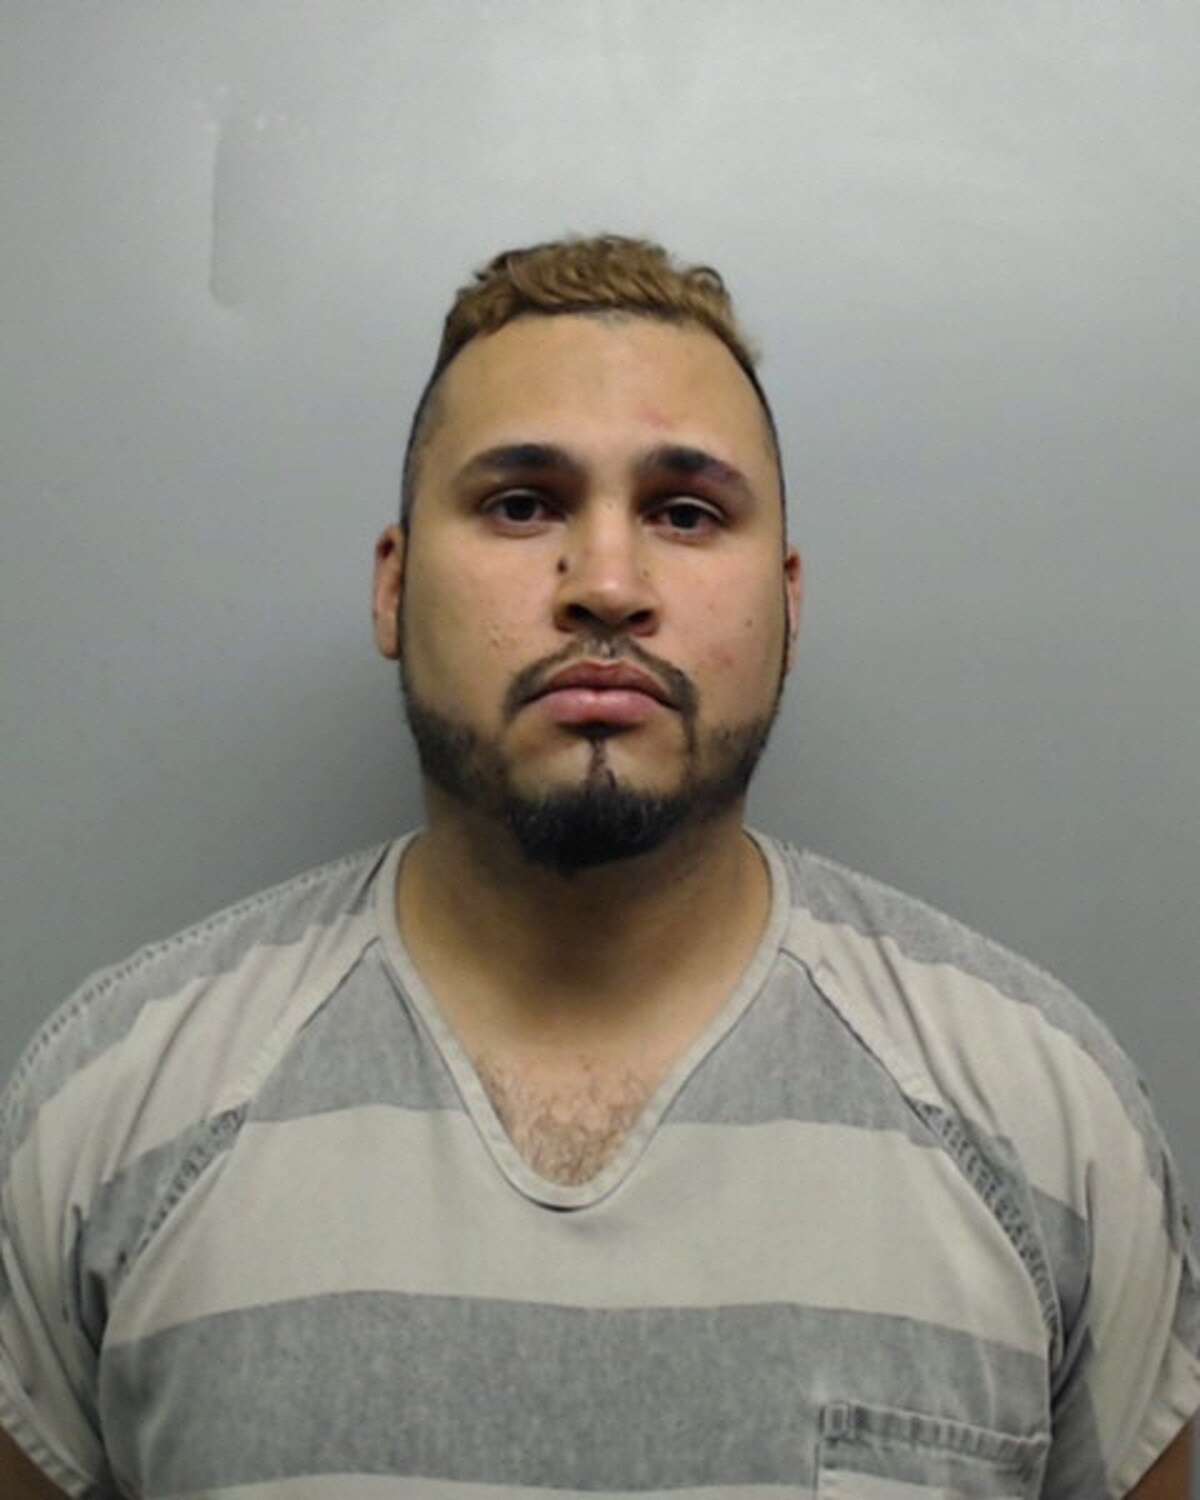 Jaime A. Sanchez, 34, was charged with aggravated assault with firearm, resisting arrest, evading arrest and failure to identify.